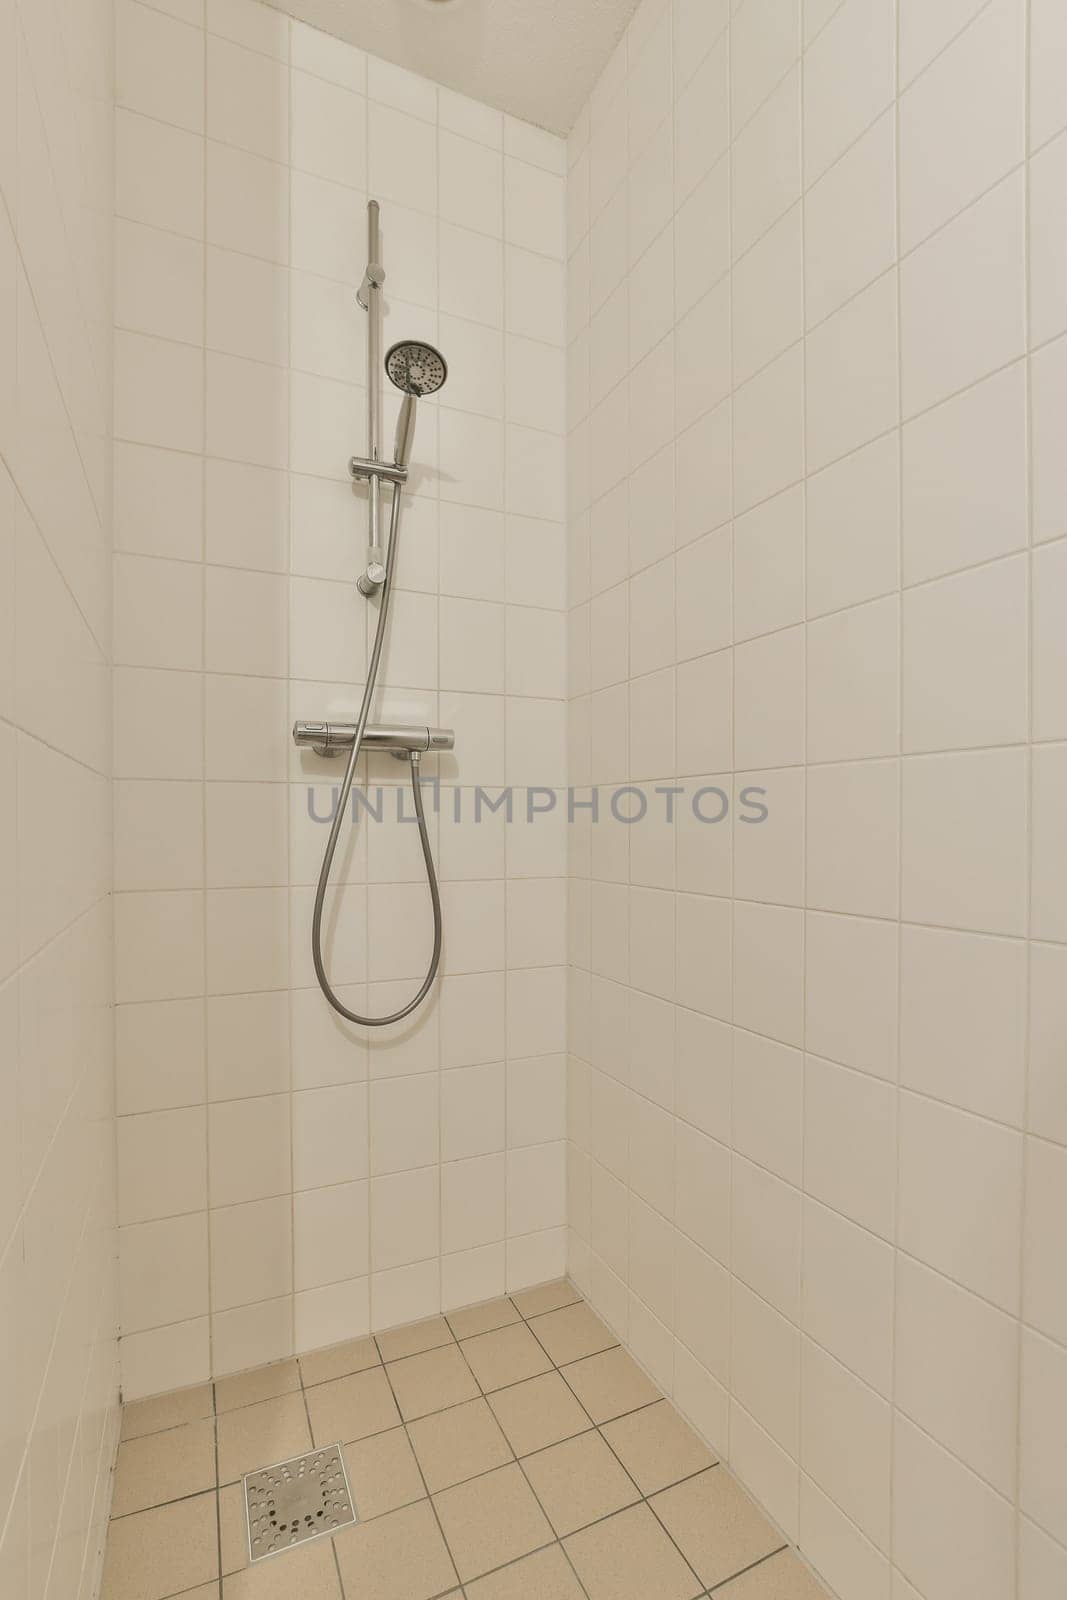 a white tiled bathroom with a shower head and hand rail in the wall is made out of ceramic tiles on the floor